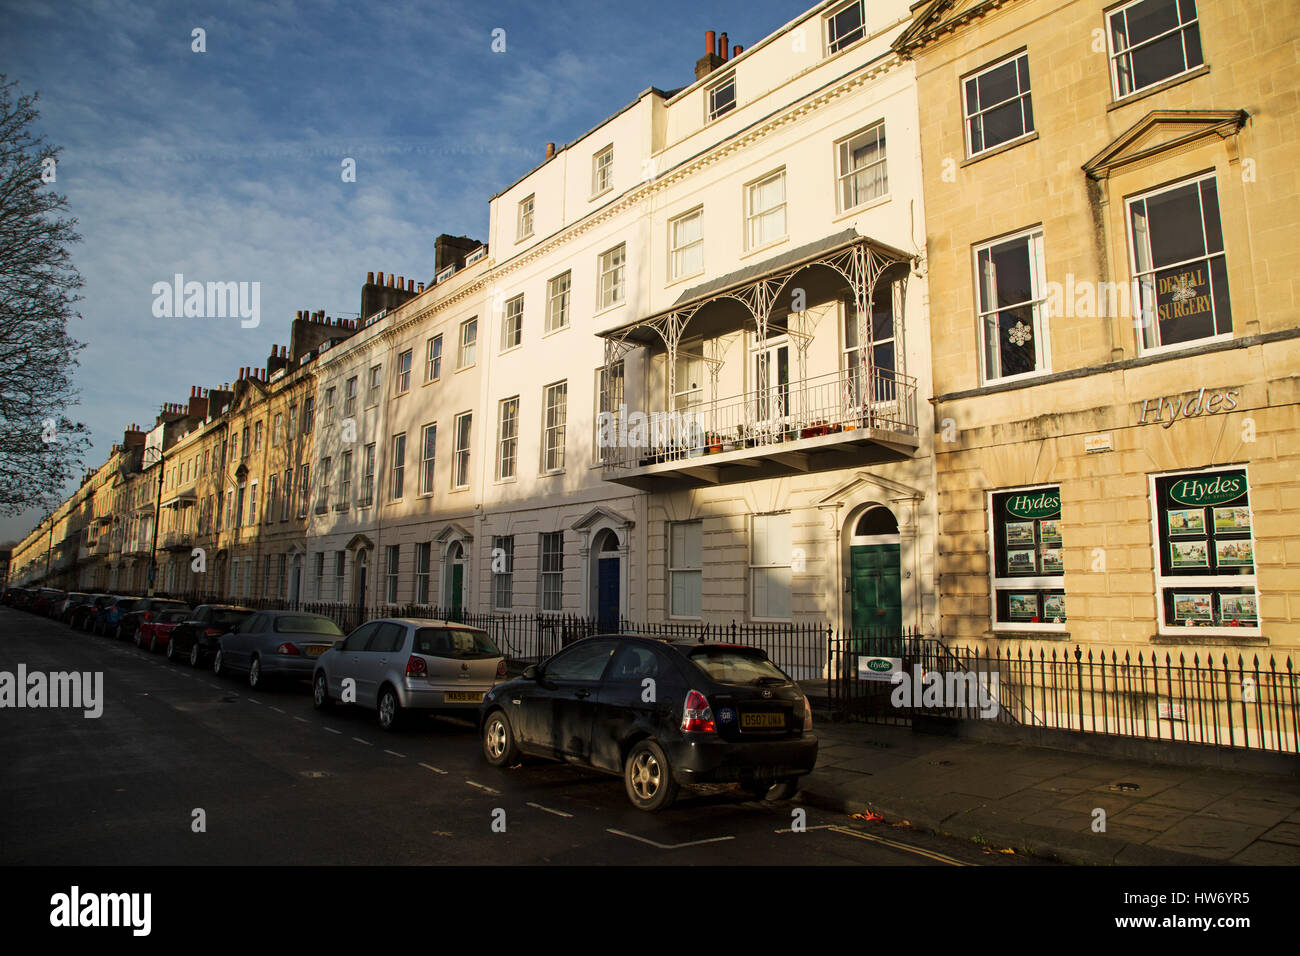 Townhouses in the Clifton district of Bristol, England. Several of the houses have wrought iron balconies. Stock Photo